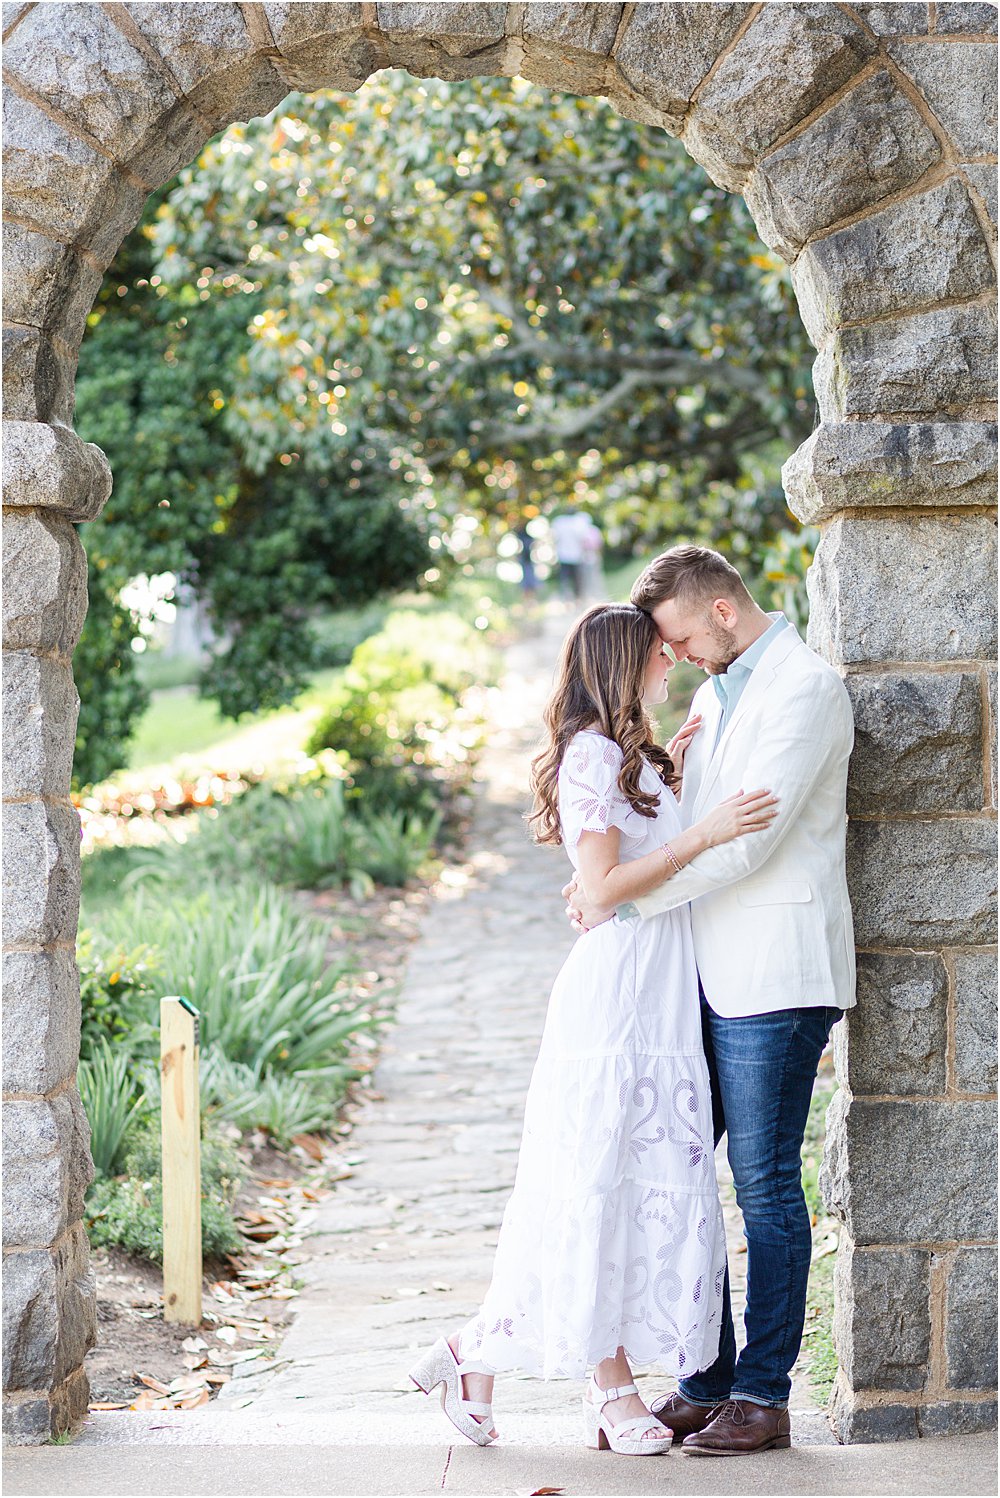 The couple, eyes closed and forehead to forehead, stand beneath a stone arch at Maymont Park during their effortlessly chic engagement session.